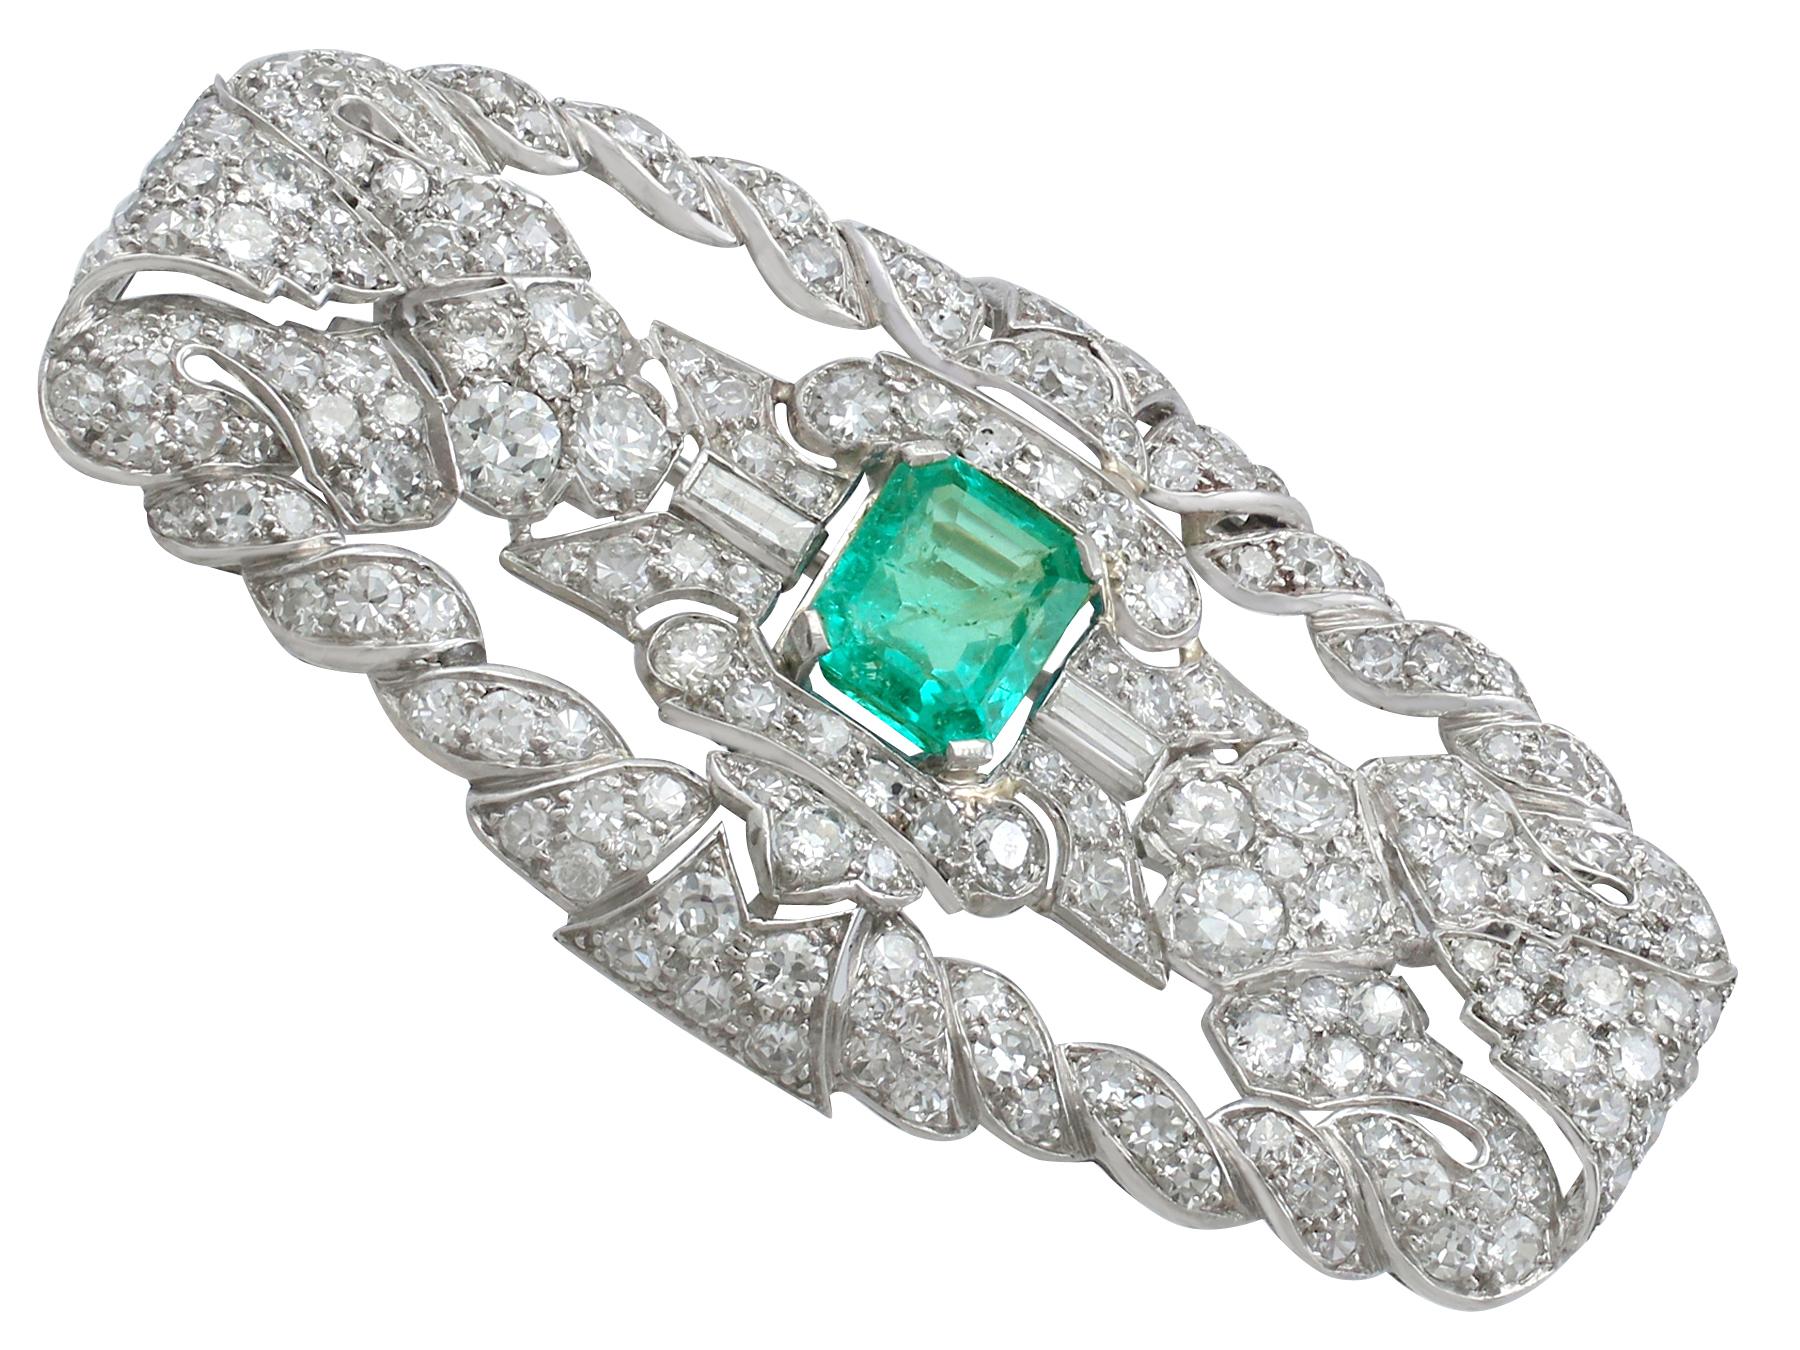 A stunning, fine and impressive 1.98 Ct emerald and 5.22 Ct diamond brooch in platinum; part of our authentic antique Art Deco jewelry/jewelry collection.

This stunning example of antique emerald and diamond brooch has been crafted in